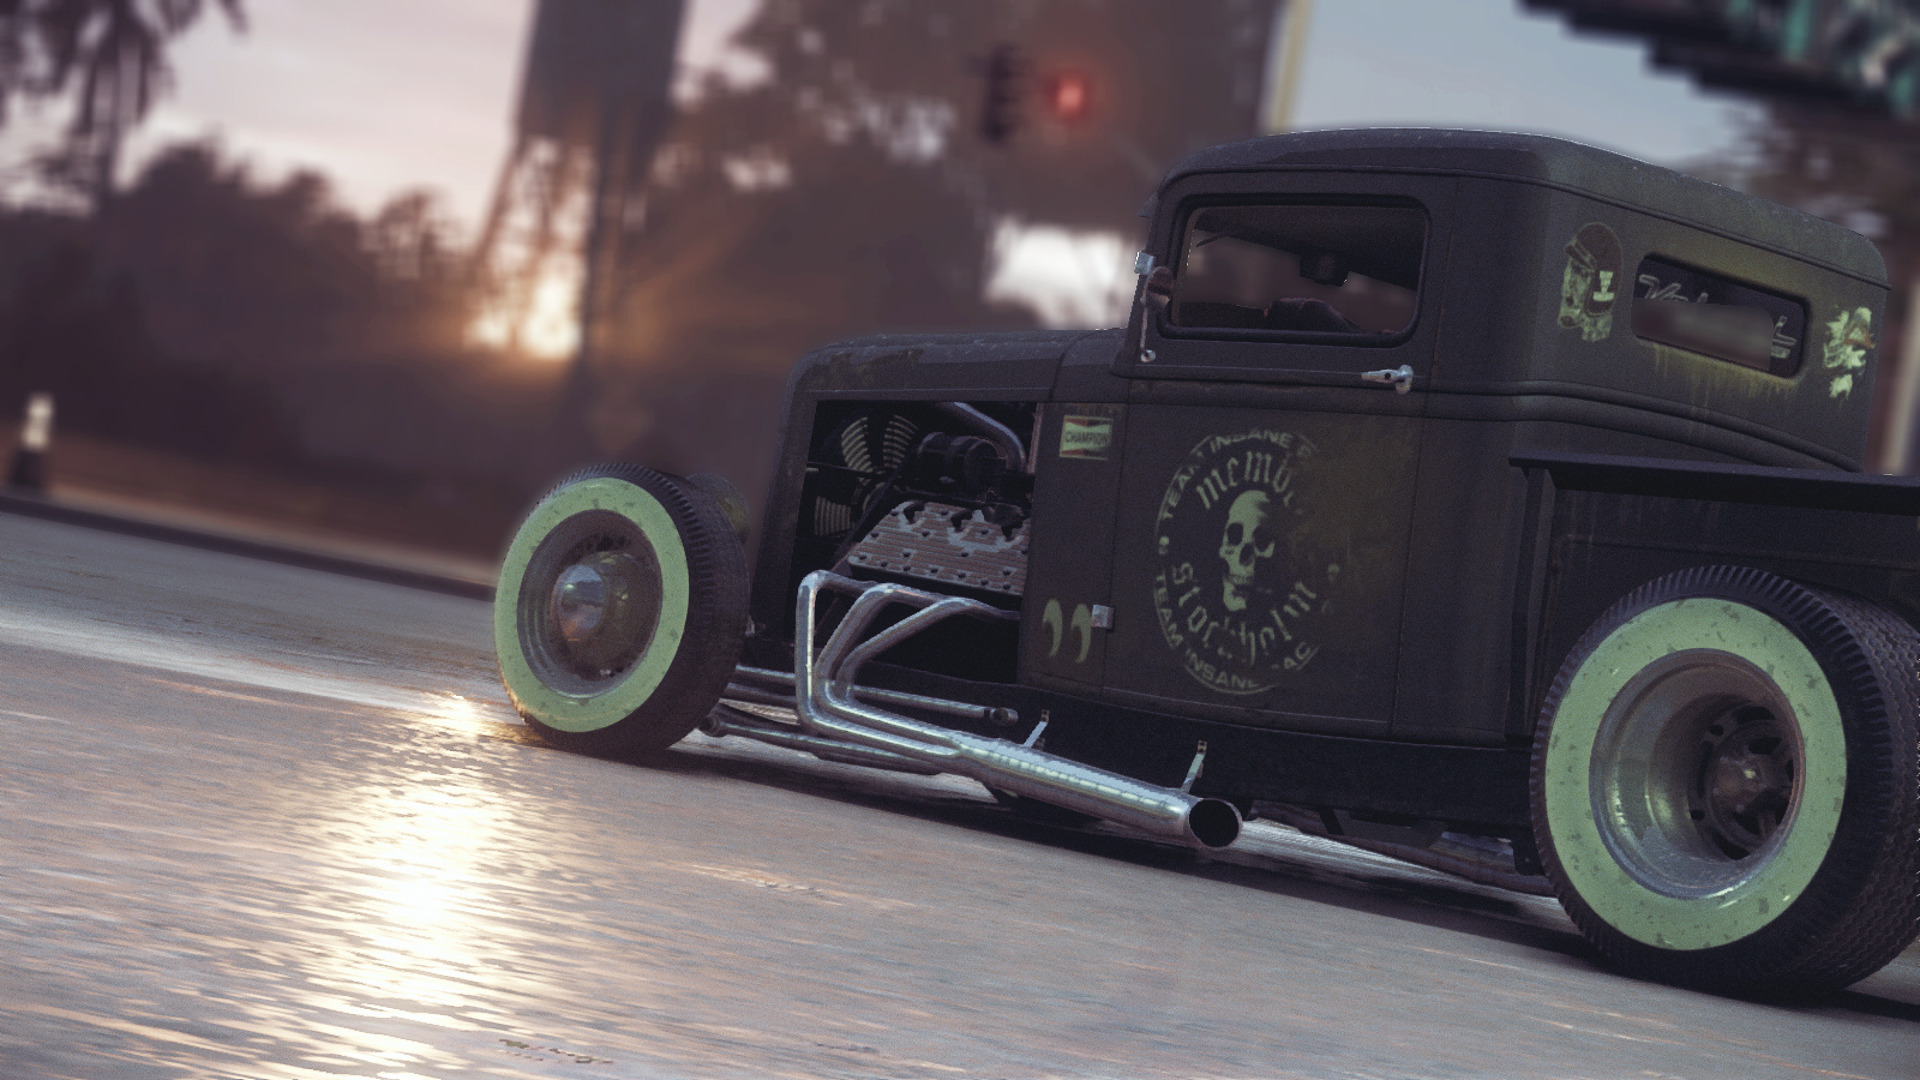 Need For Speed, Ford, Hot Rod, Rat Rod, Car, Photography, Custom